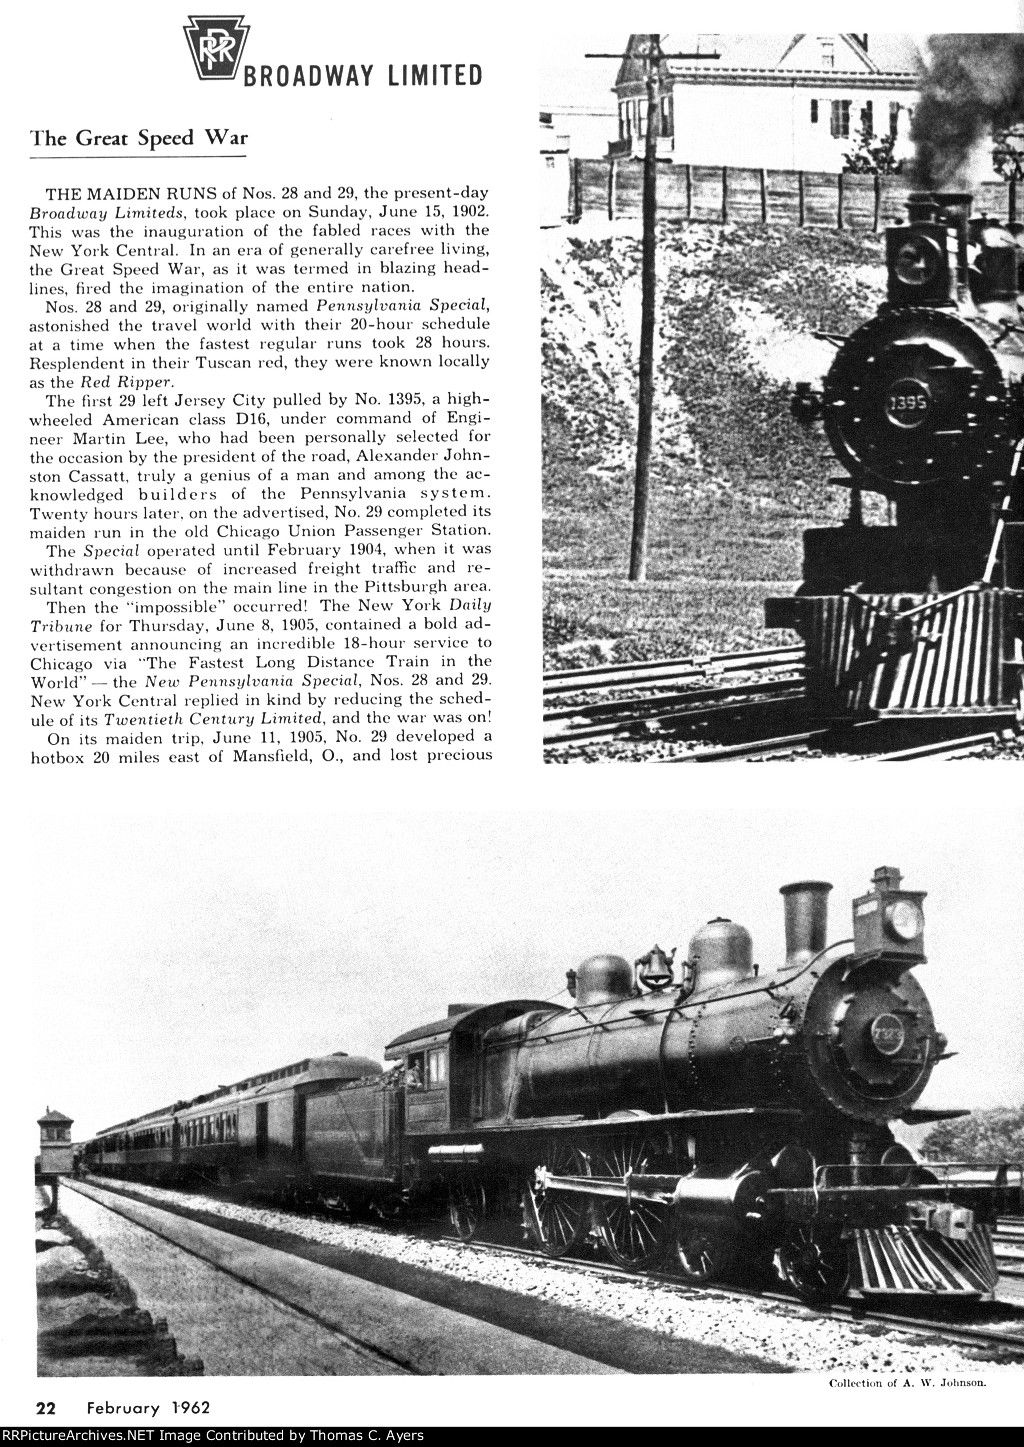 "The Broadway Limited," Page 22, 1962